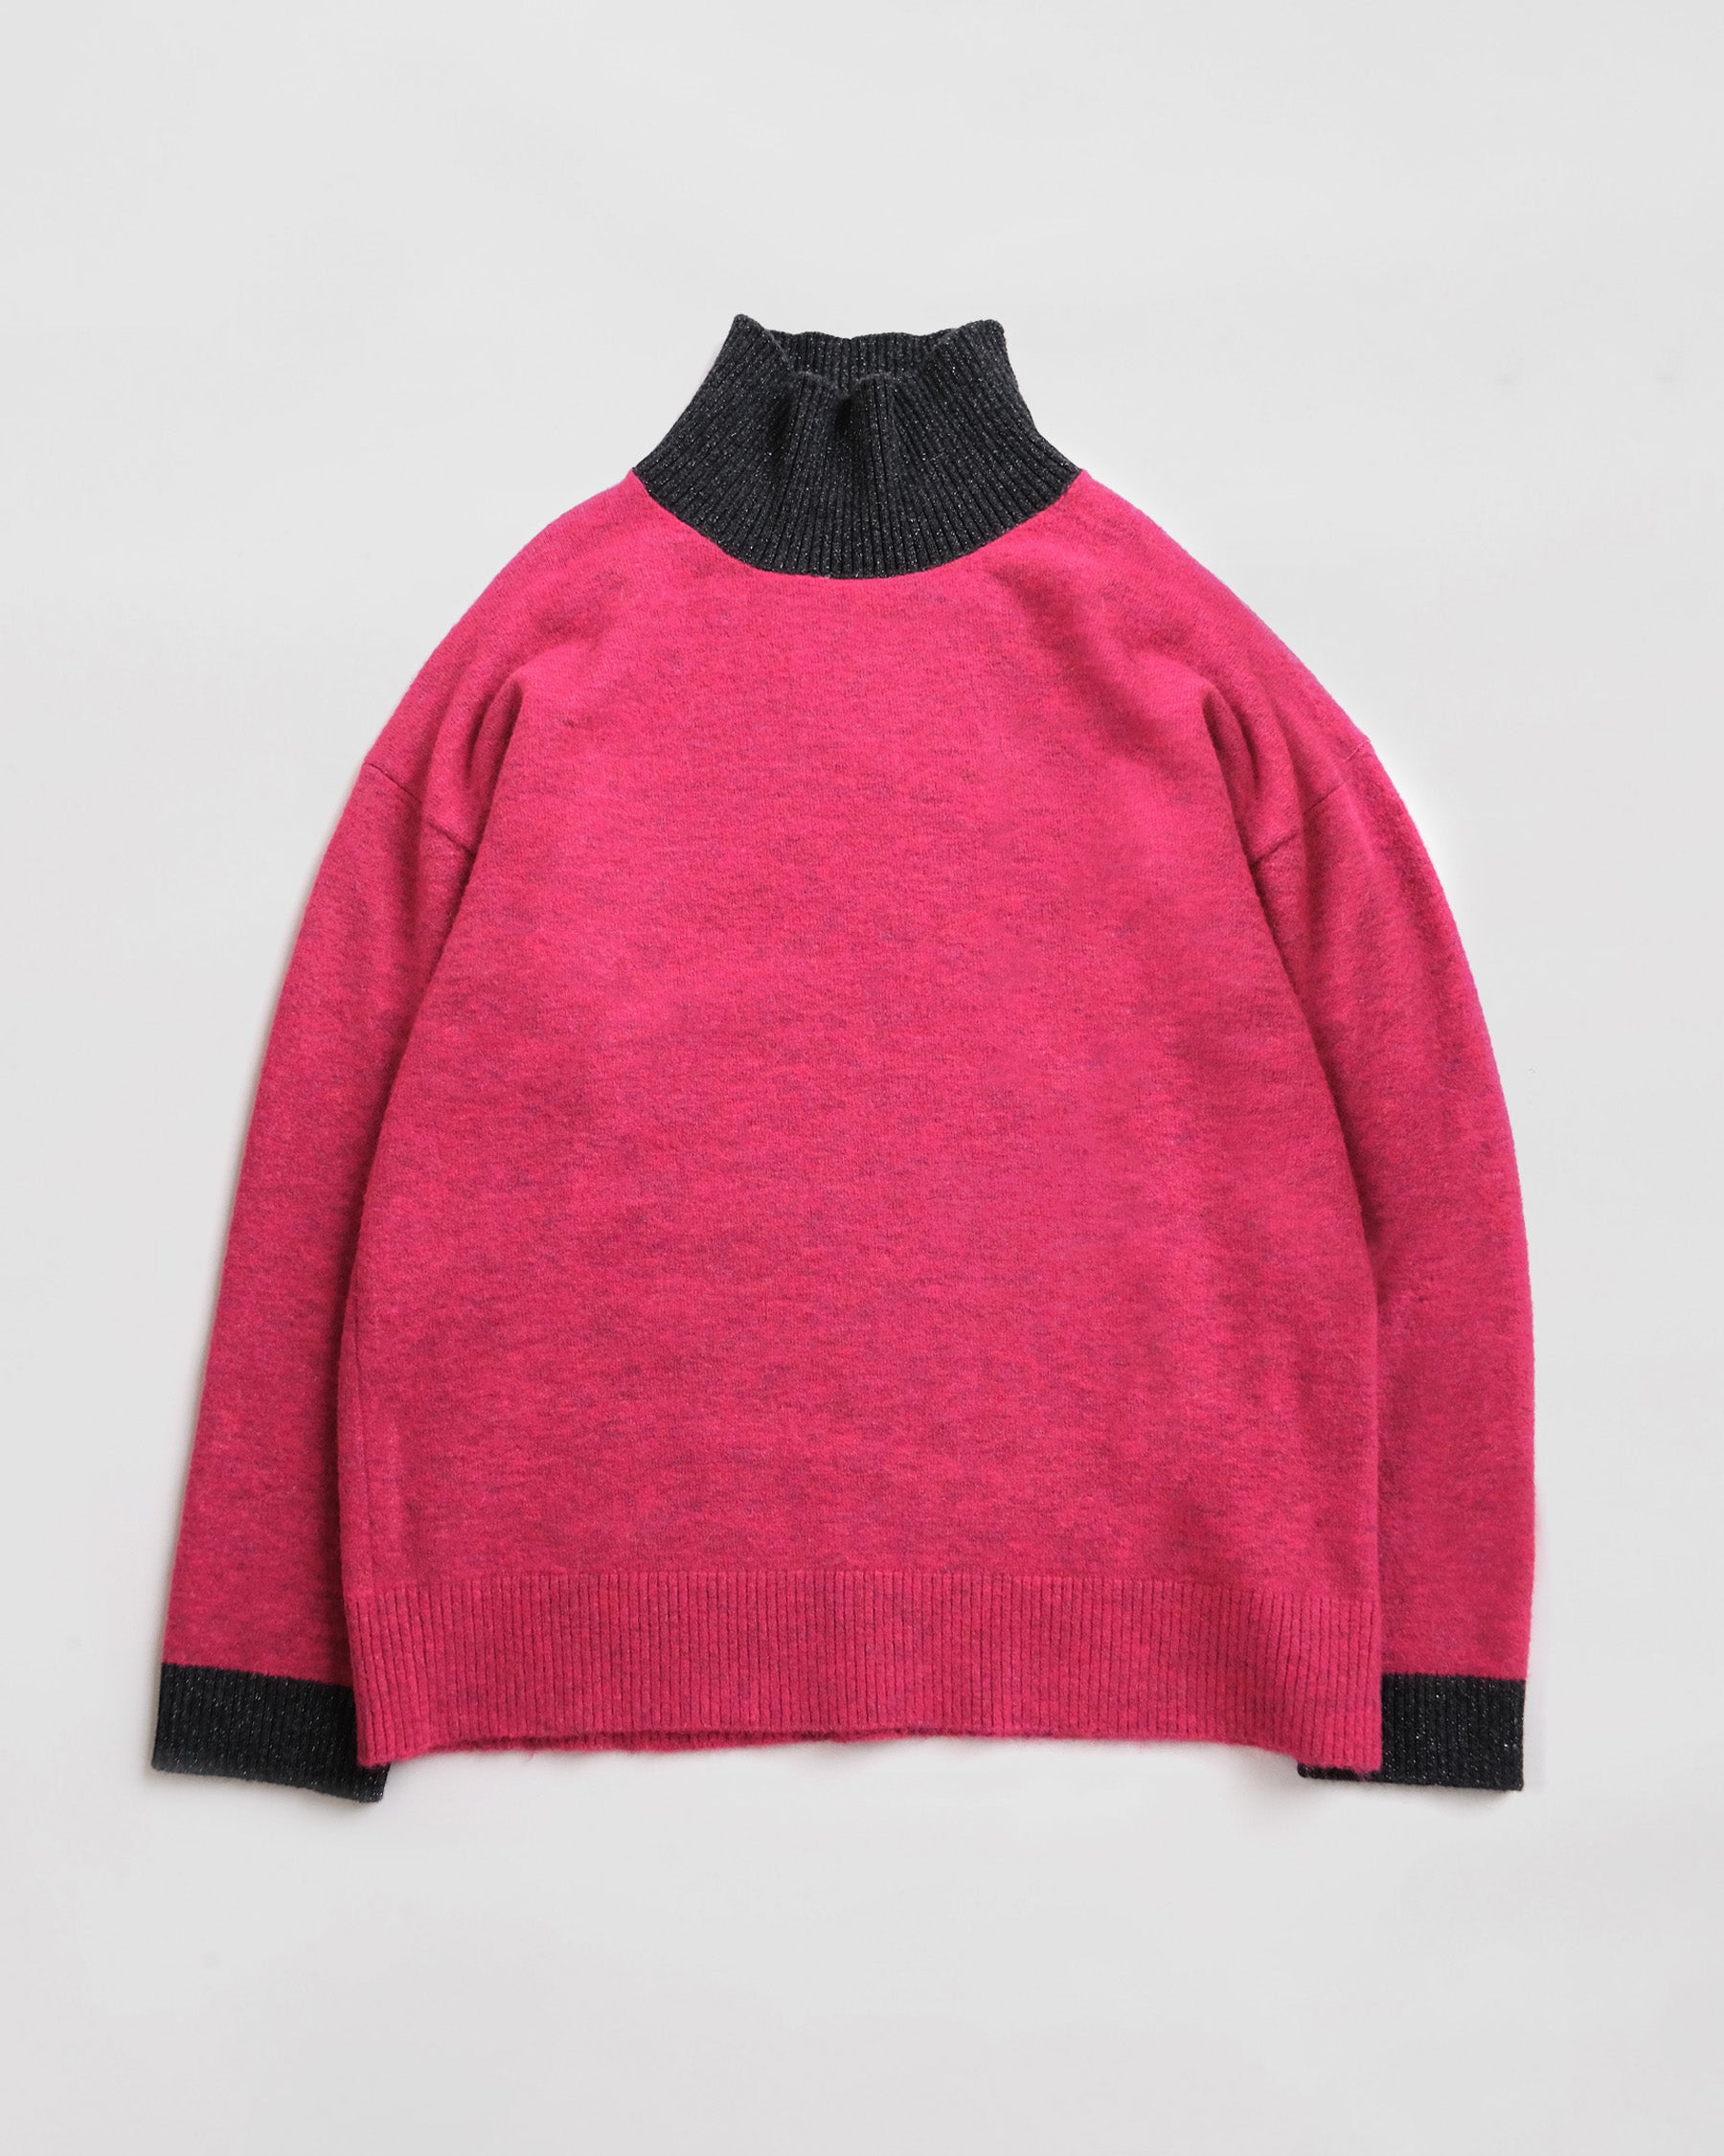 RYE TENDER]404 High Neck Bicolor Sweater - Pink×Chacoal 